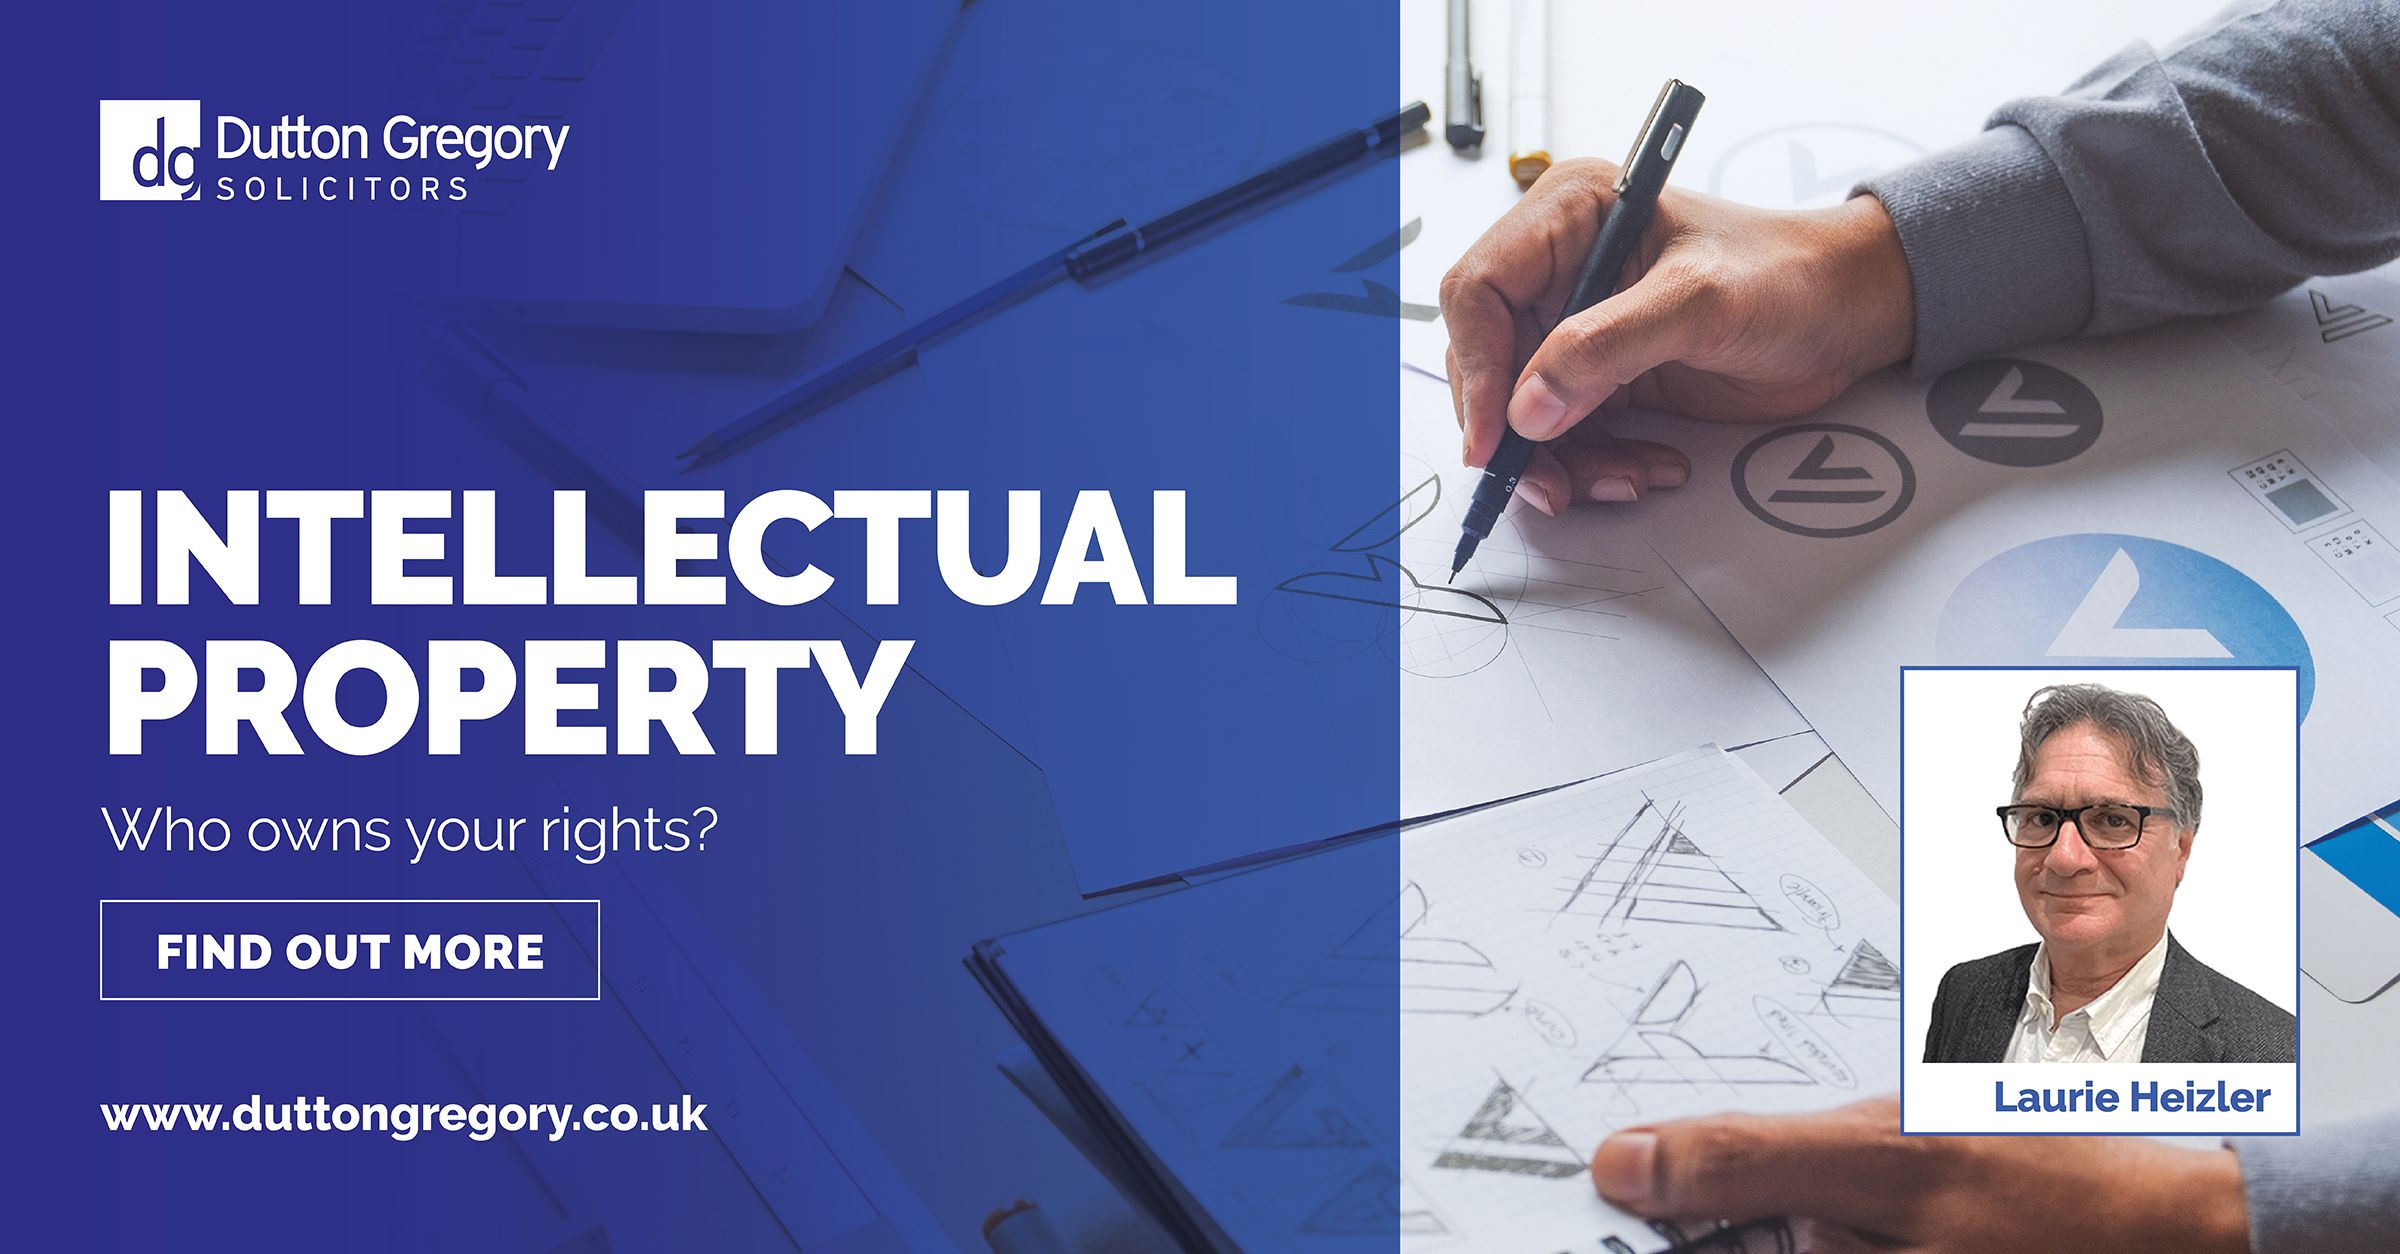 Who Owns Your Intellectual Property Rights?